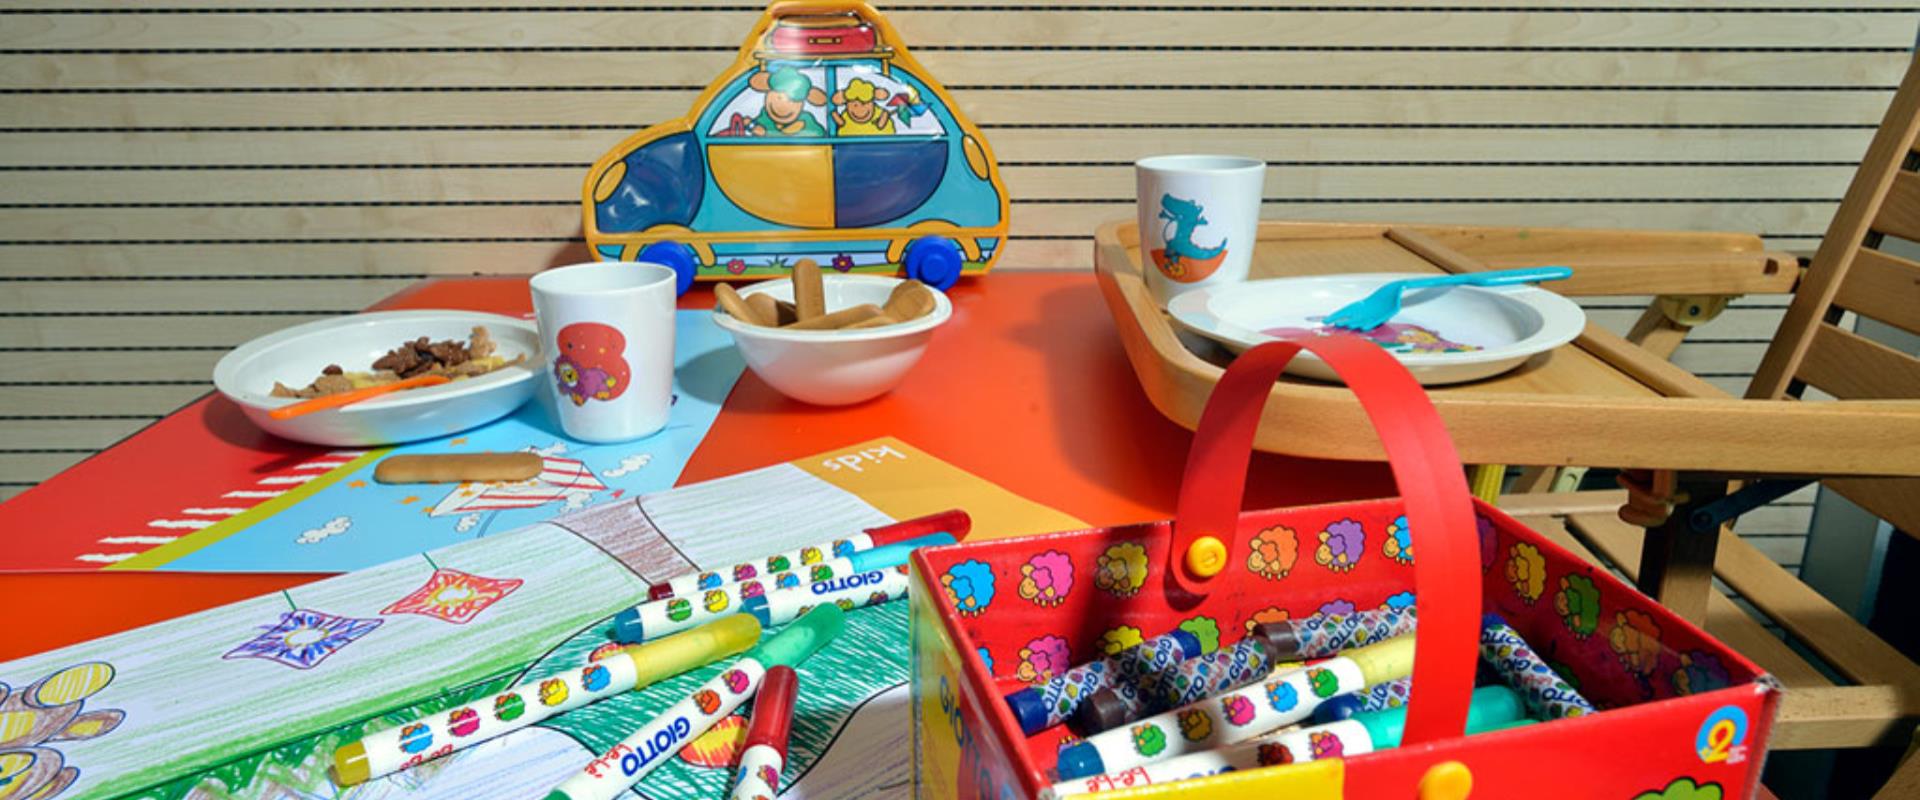 Discover kid-friendly products dedicated at  BW PLUS City Hotel, 4 stars, Genoa Centre